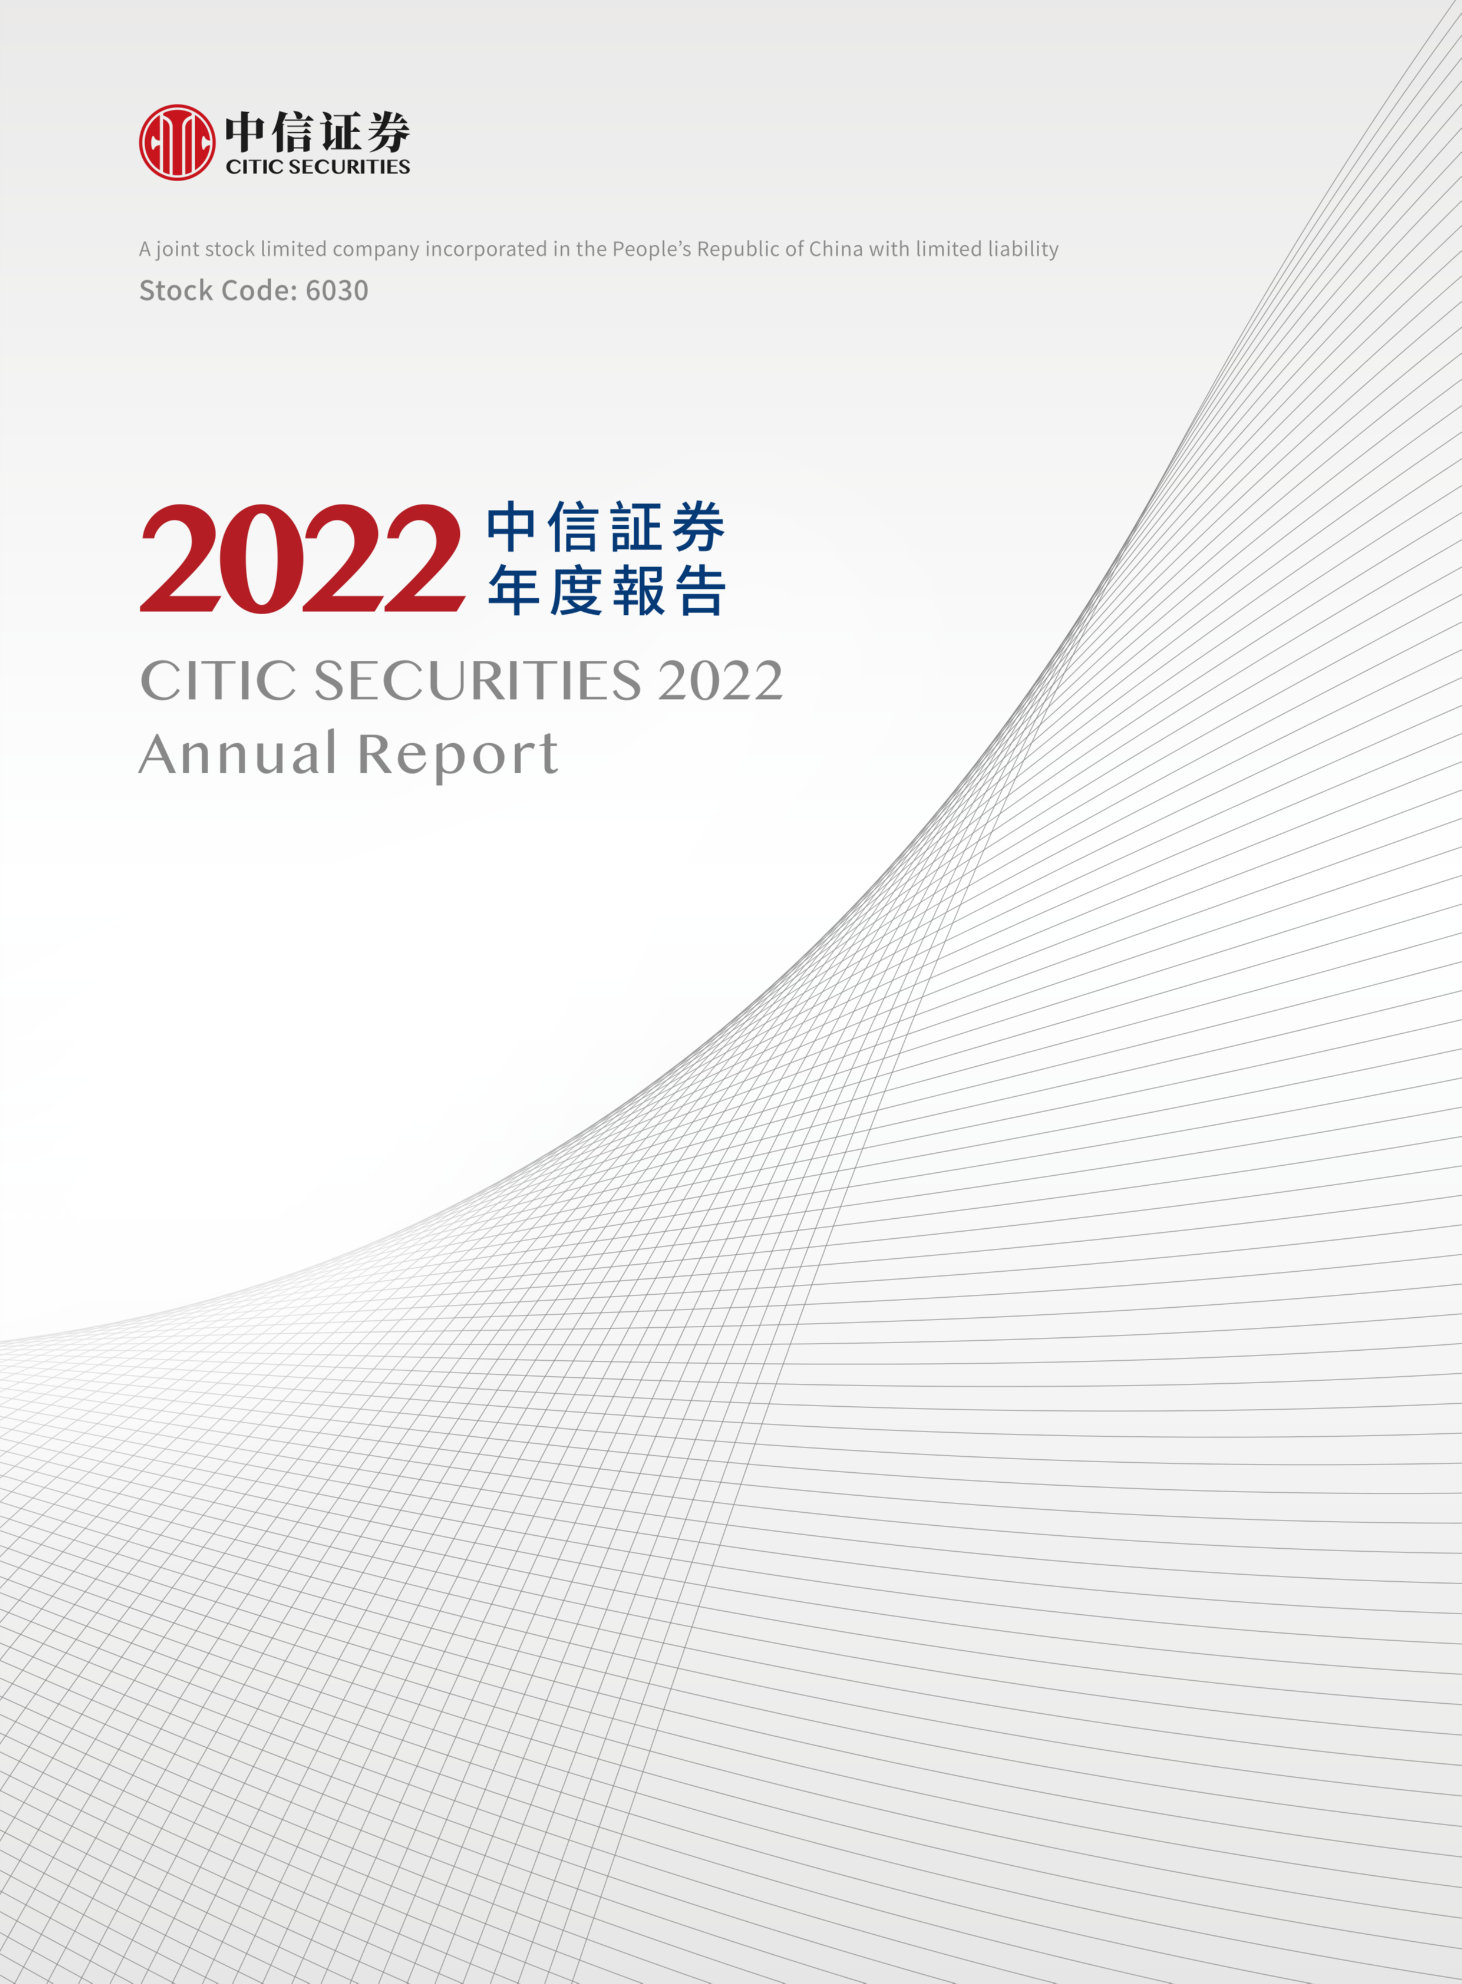 annual report awards, annual report competition, annual reports